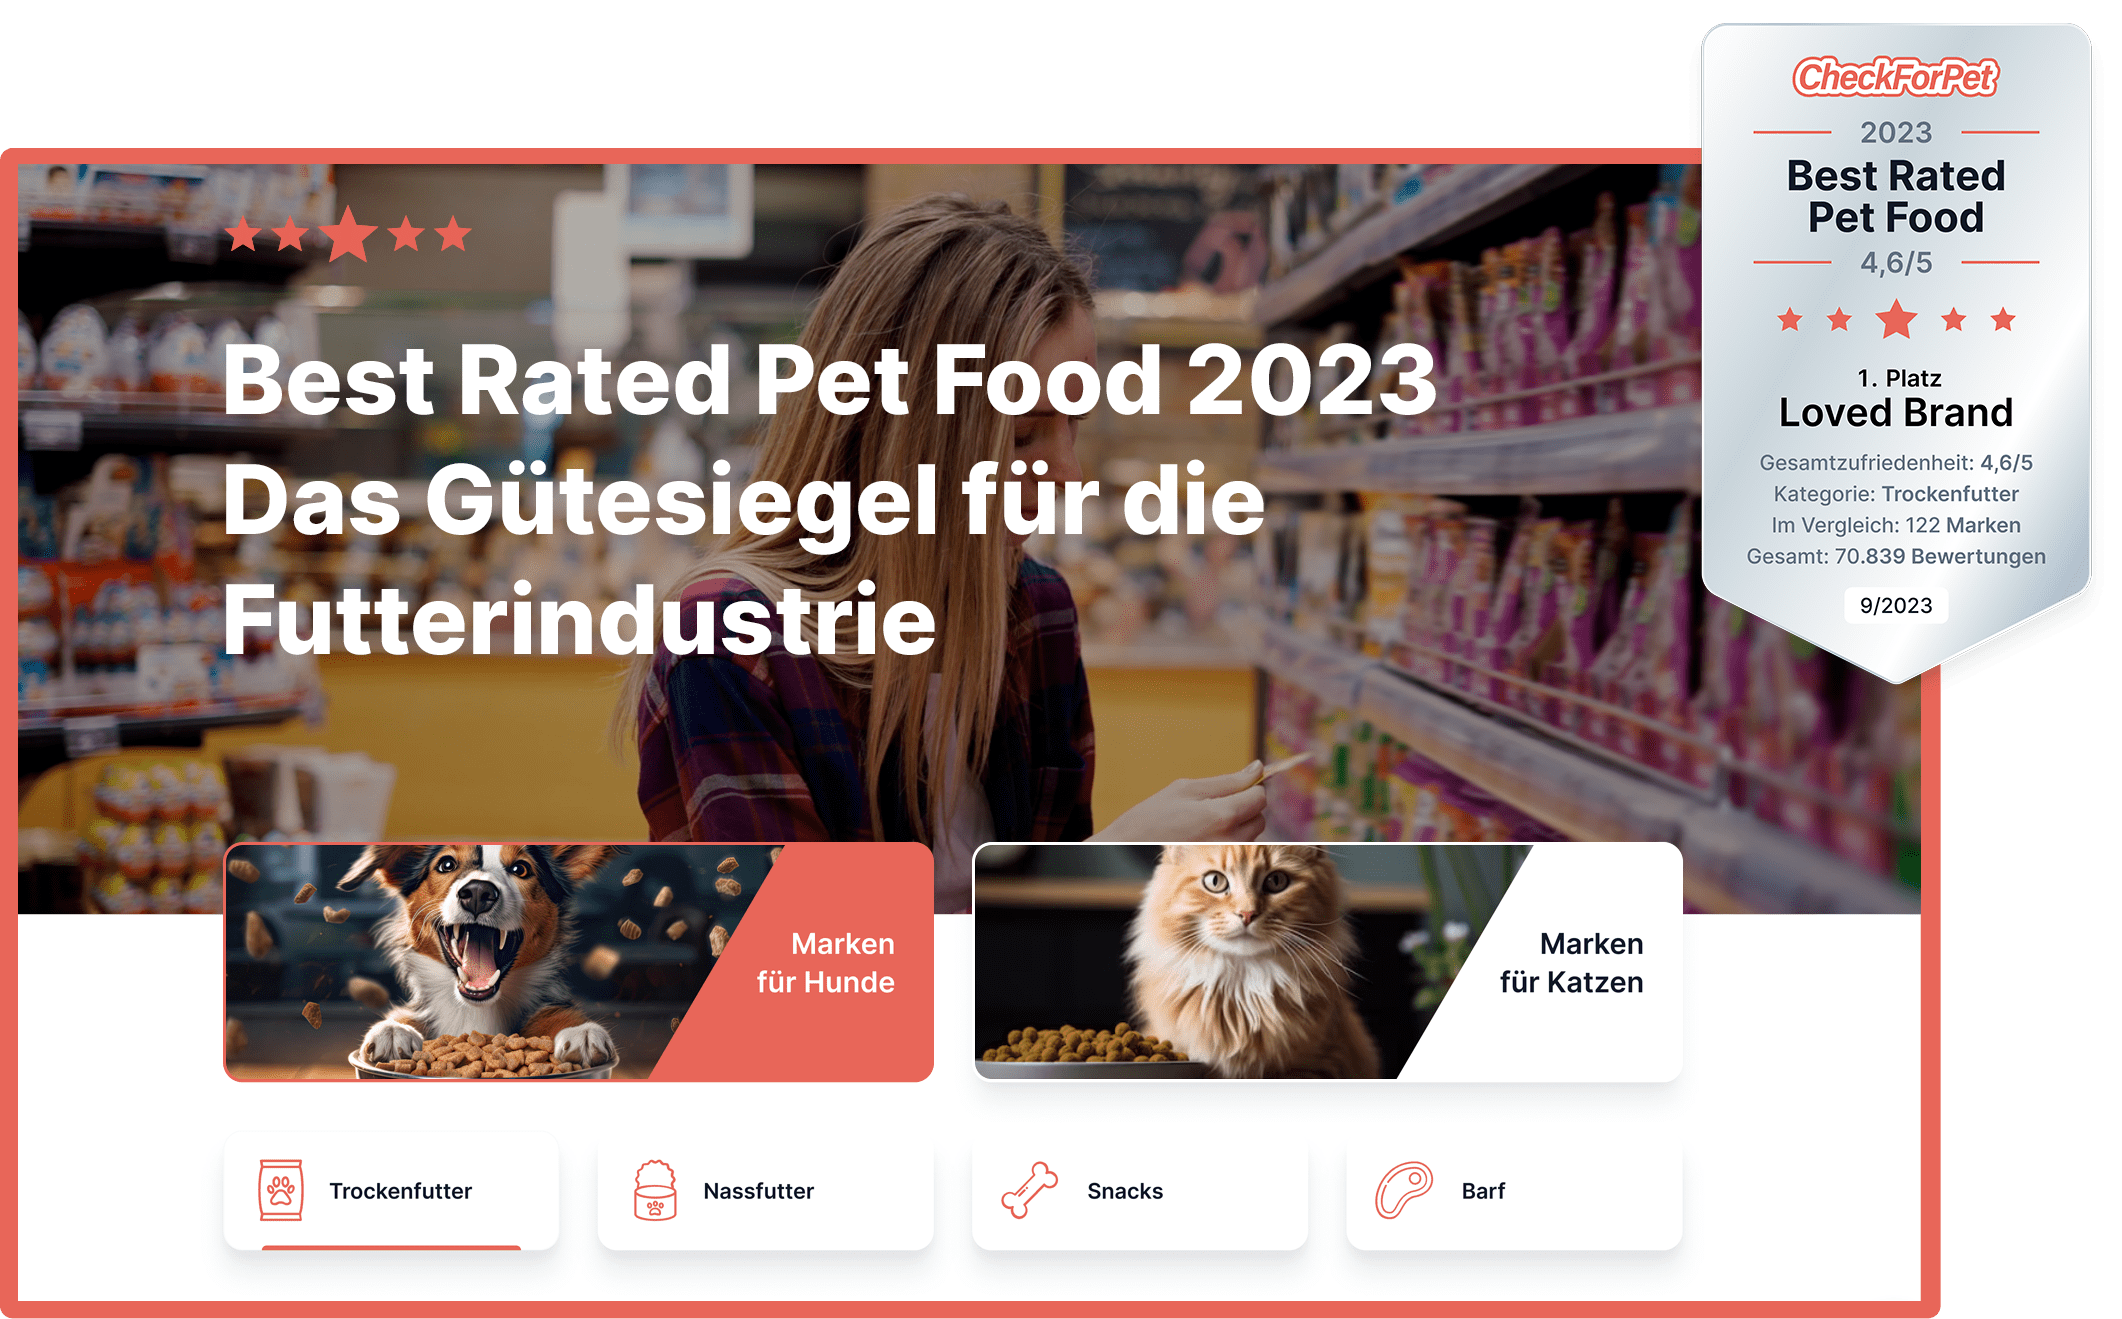 BEST RATED PET FOOD 2023